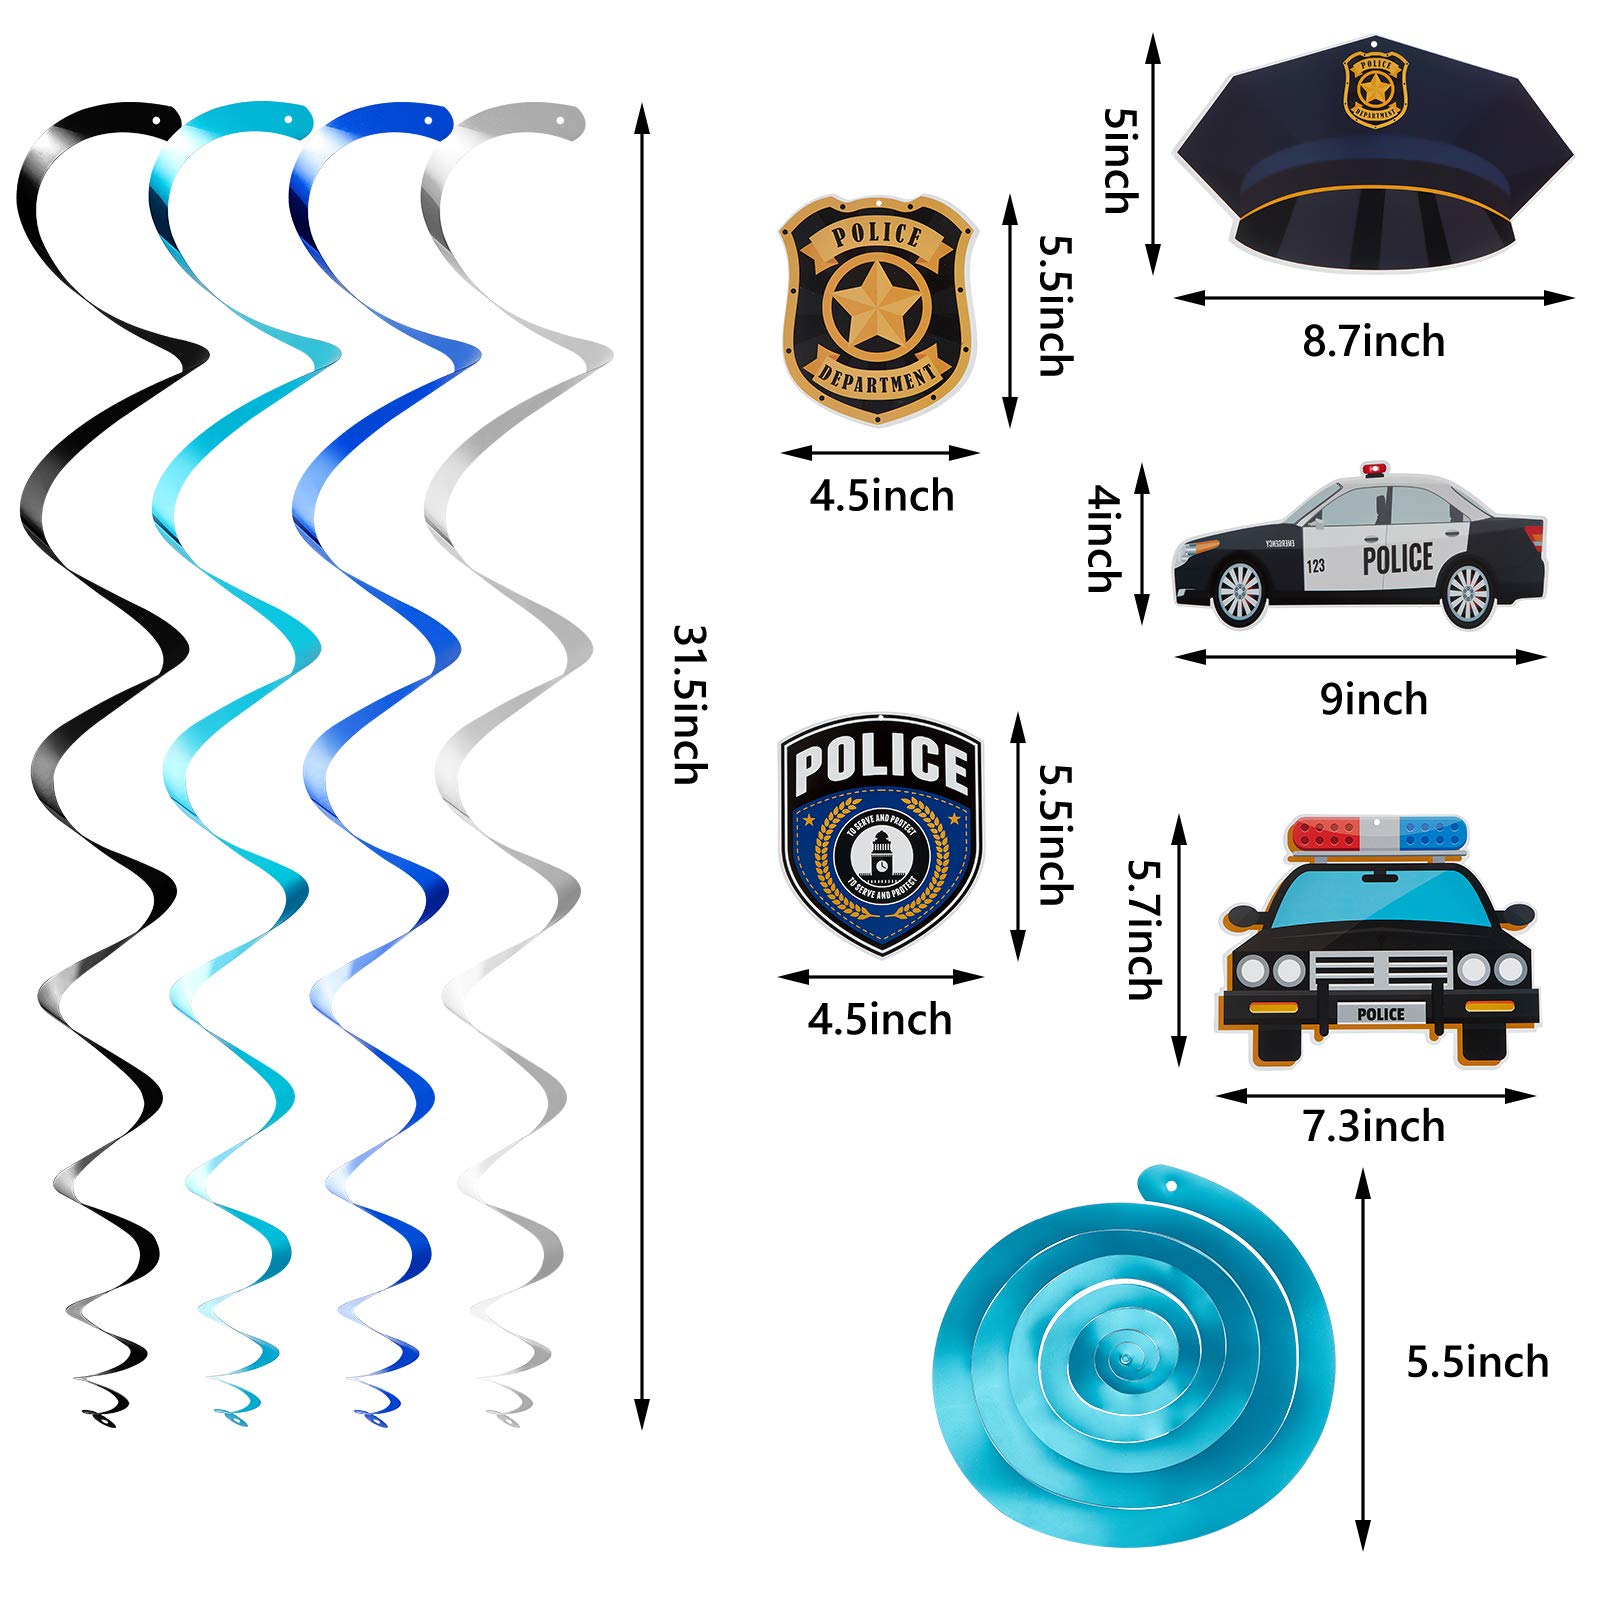 32 Pieces Police Birthday Party Decorations Set Police Party Swirls Set Including 20 Police Party Latex Balloons 2 Police Banners 10 Police Hanging Swirls for Police Themed Birthday Party